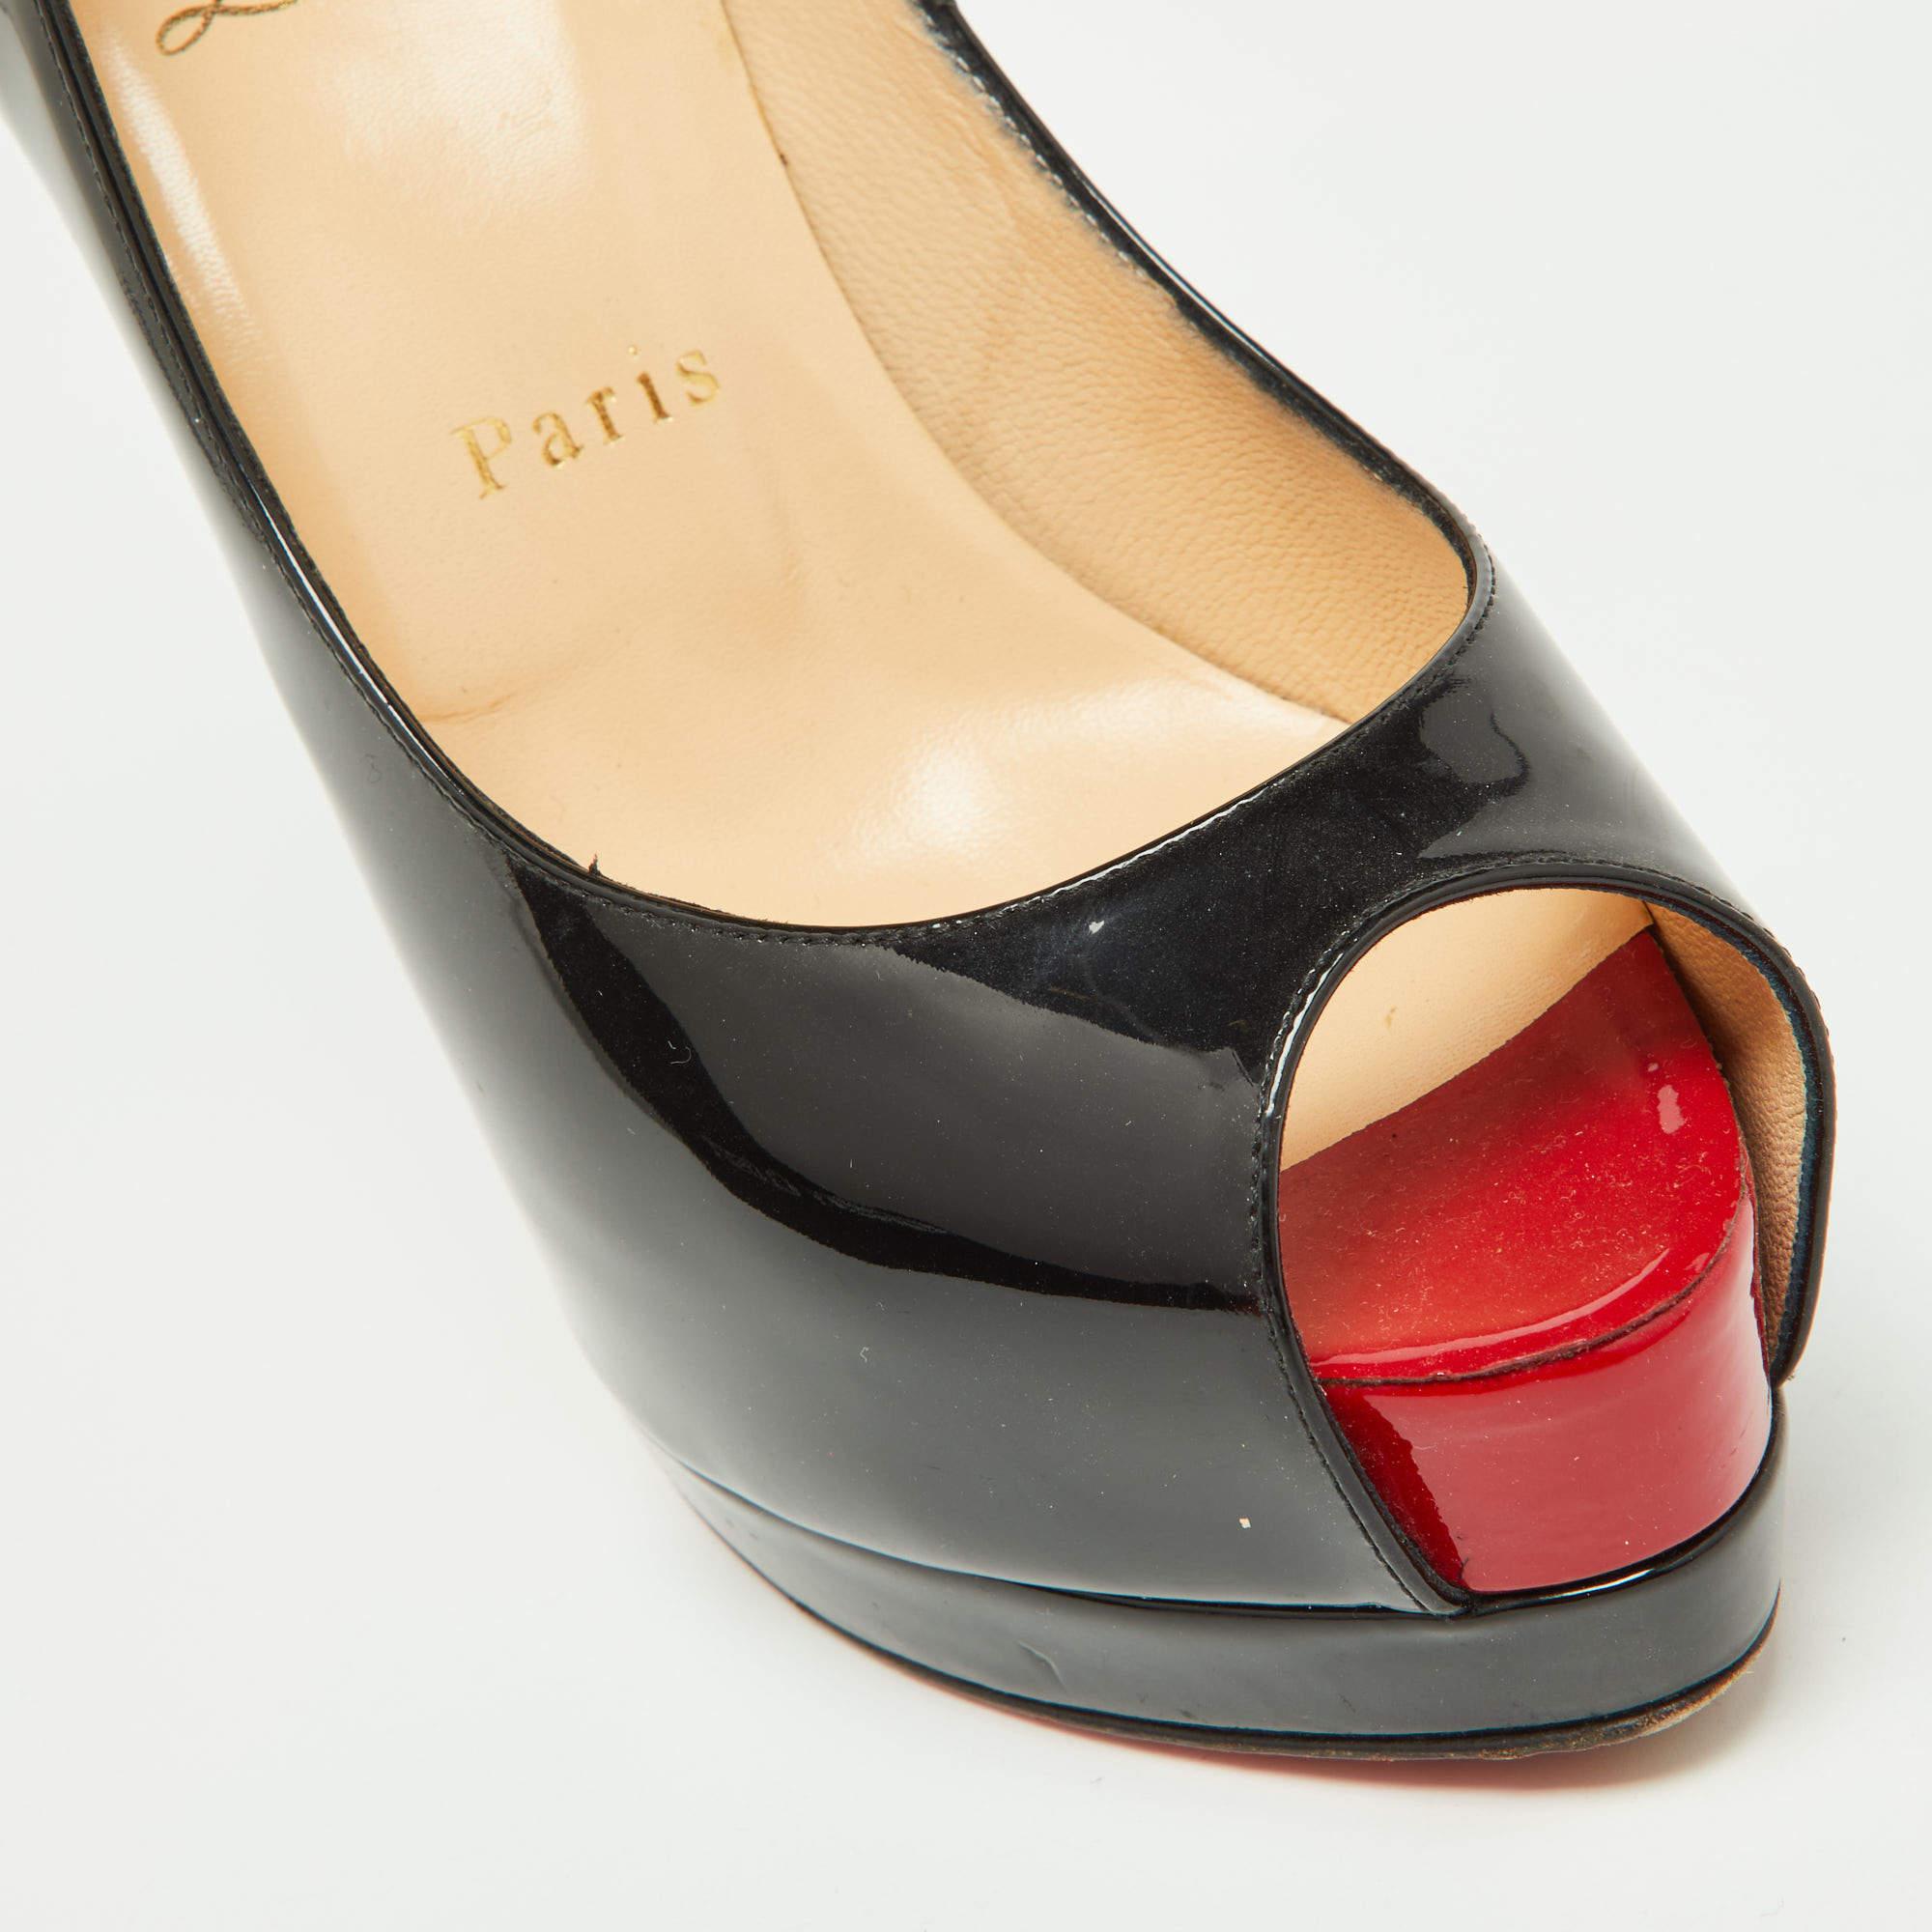 Christian Louboutin Black Patent Leather Very Prive Peep Toe Pumps Size 36 For Sale 3